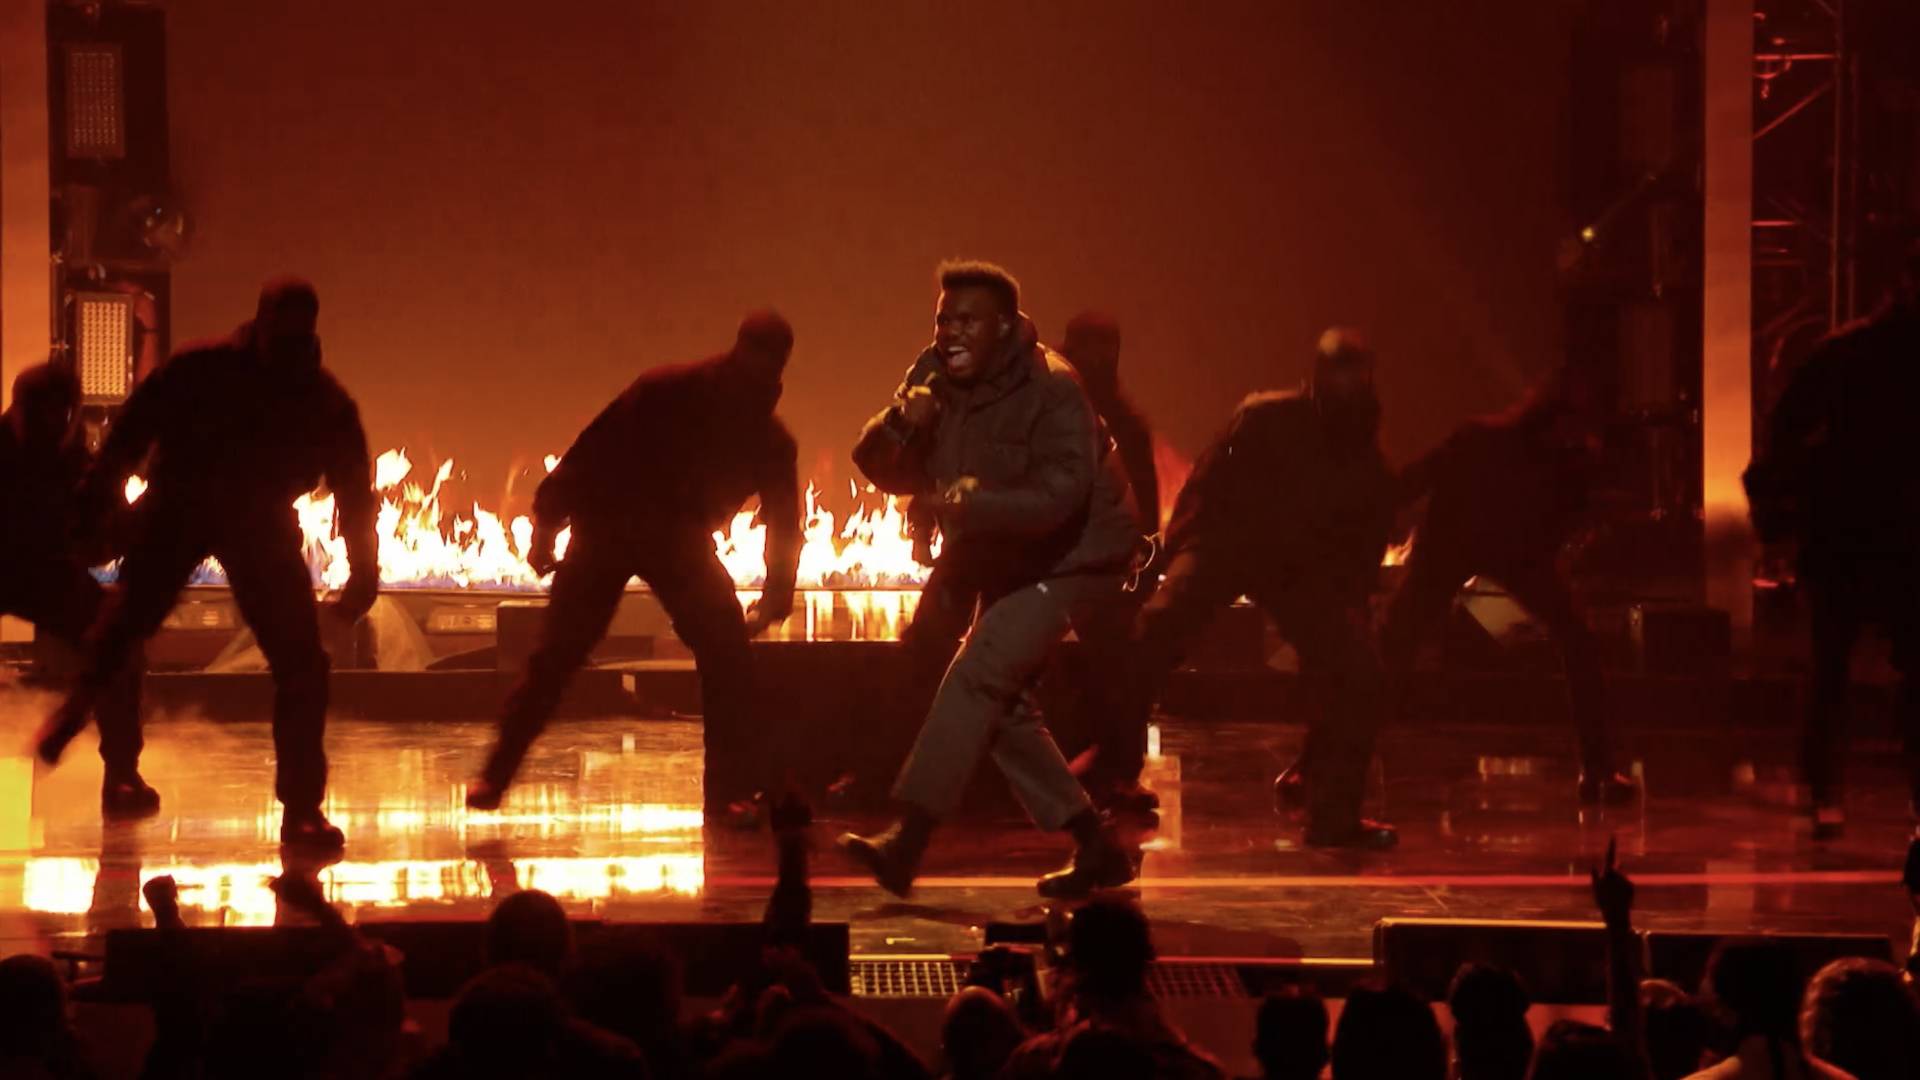 Baby Keem performing on stage full of fire at the BET Hip Hop Awards 2021.